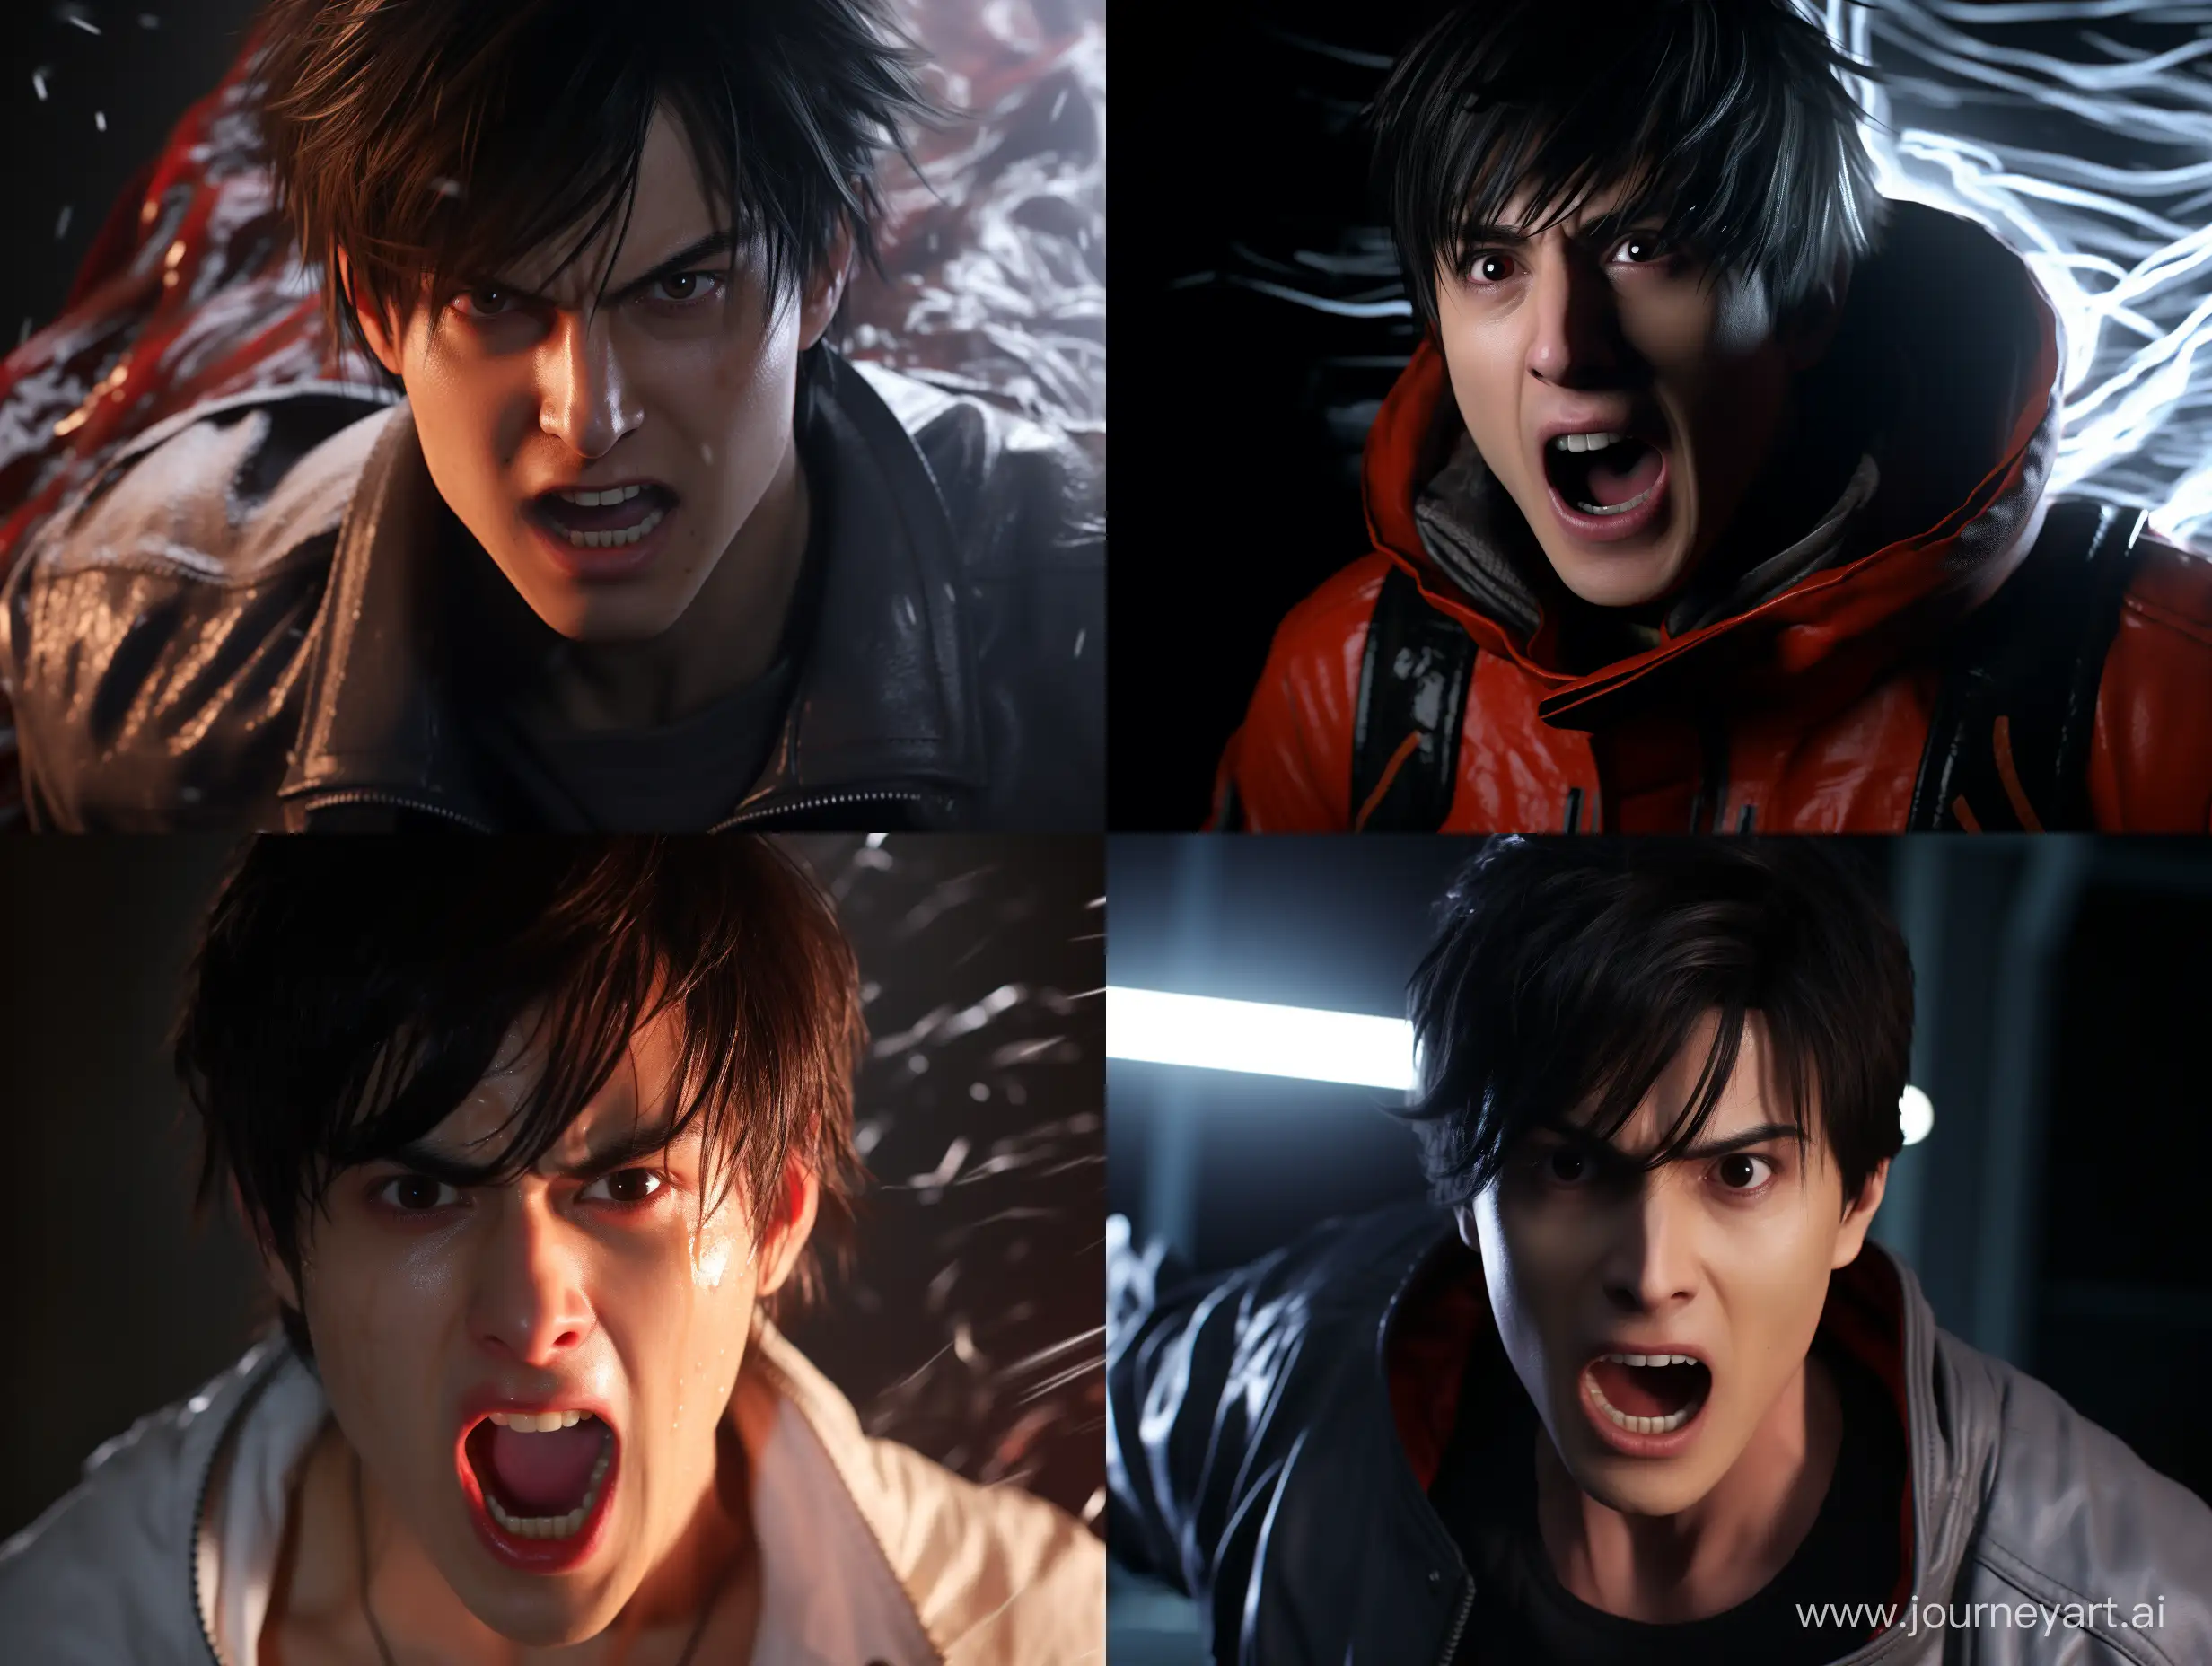 A humorous scene in the world of Tekken 8, where one of the characters, Jin Kazama is in the midst of an exaggerated and comical facial expression. His eyes are wide open, his mouth is agape, and he appears to be showing off his tongue. The background is dimly lit, creating a sense of drama and tension despite the lighthearted nature of the scene. 